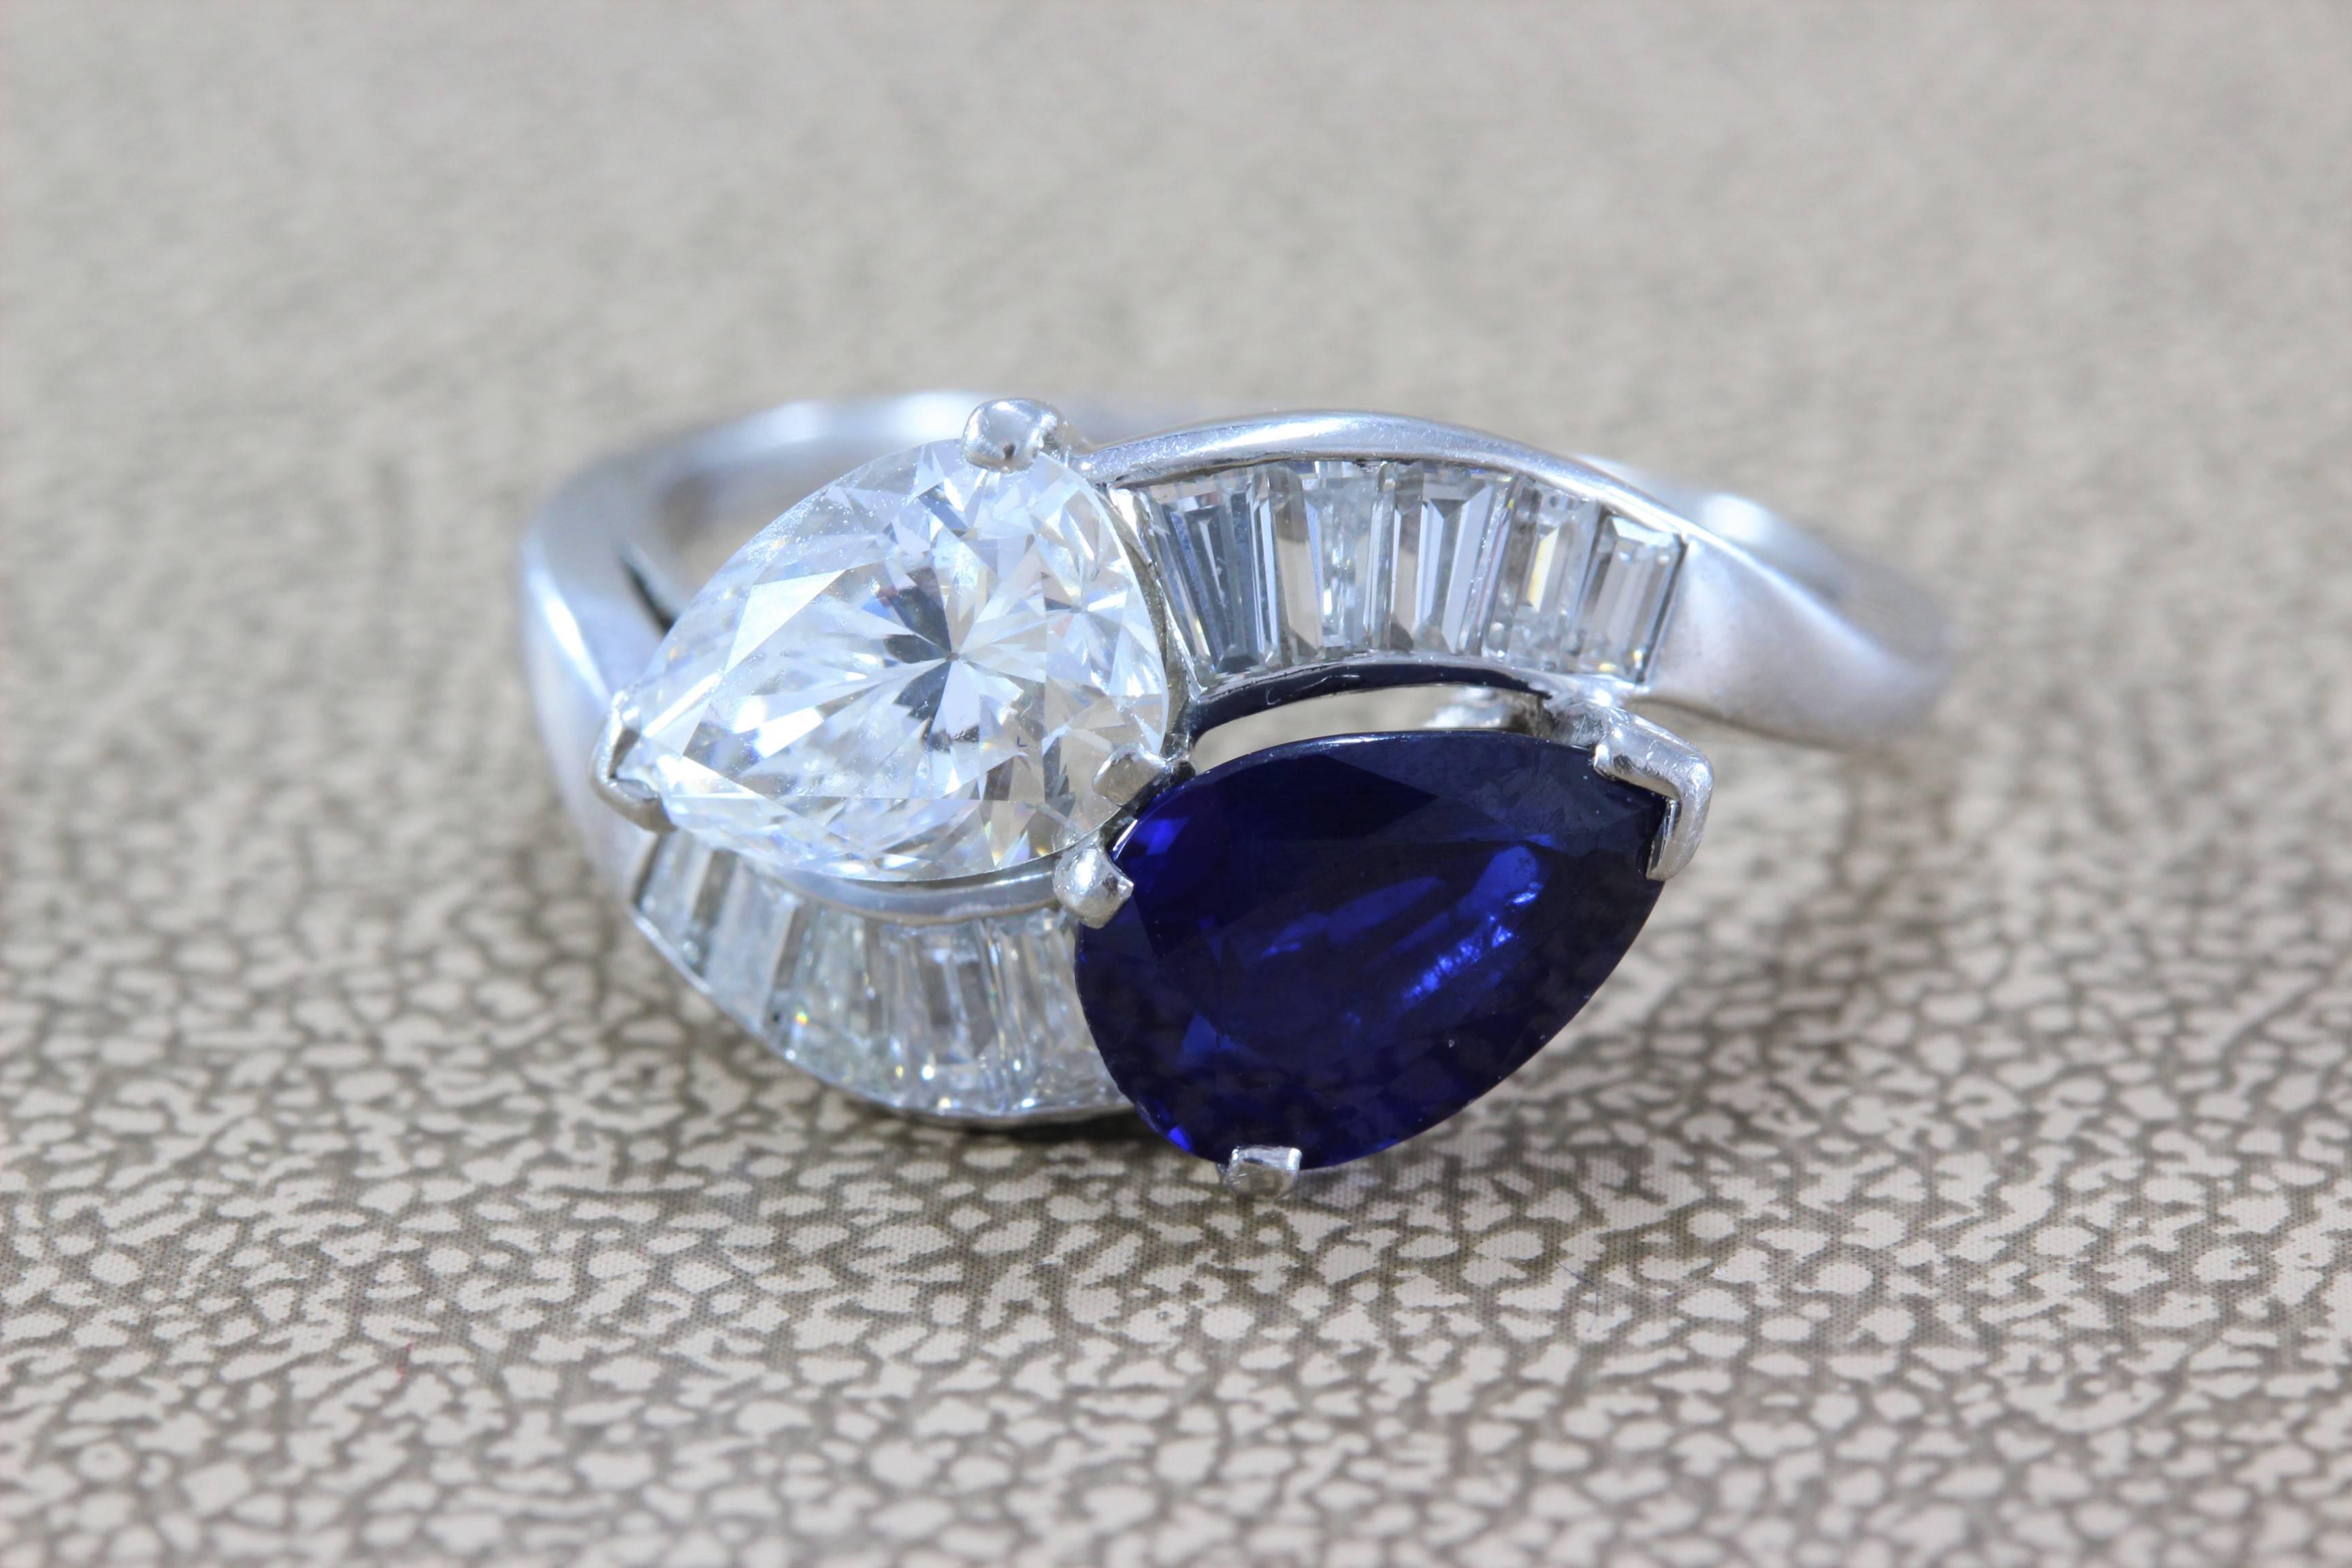 A stunning sleek bypass ring featuring a 1.27 carat GIA Certified pear shape diamond, F/SI1, and a 1.30 carat richly colored blue pear shape sapphire. Diamond baguettes accent the two stones, all set in platinum. 

Two ways to wear the ring, diamond